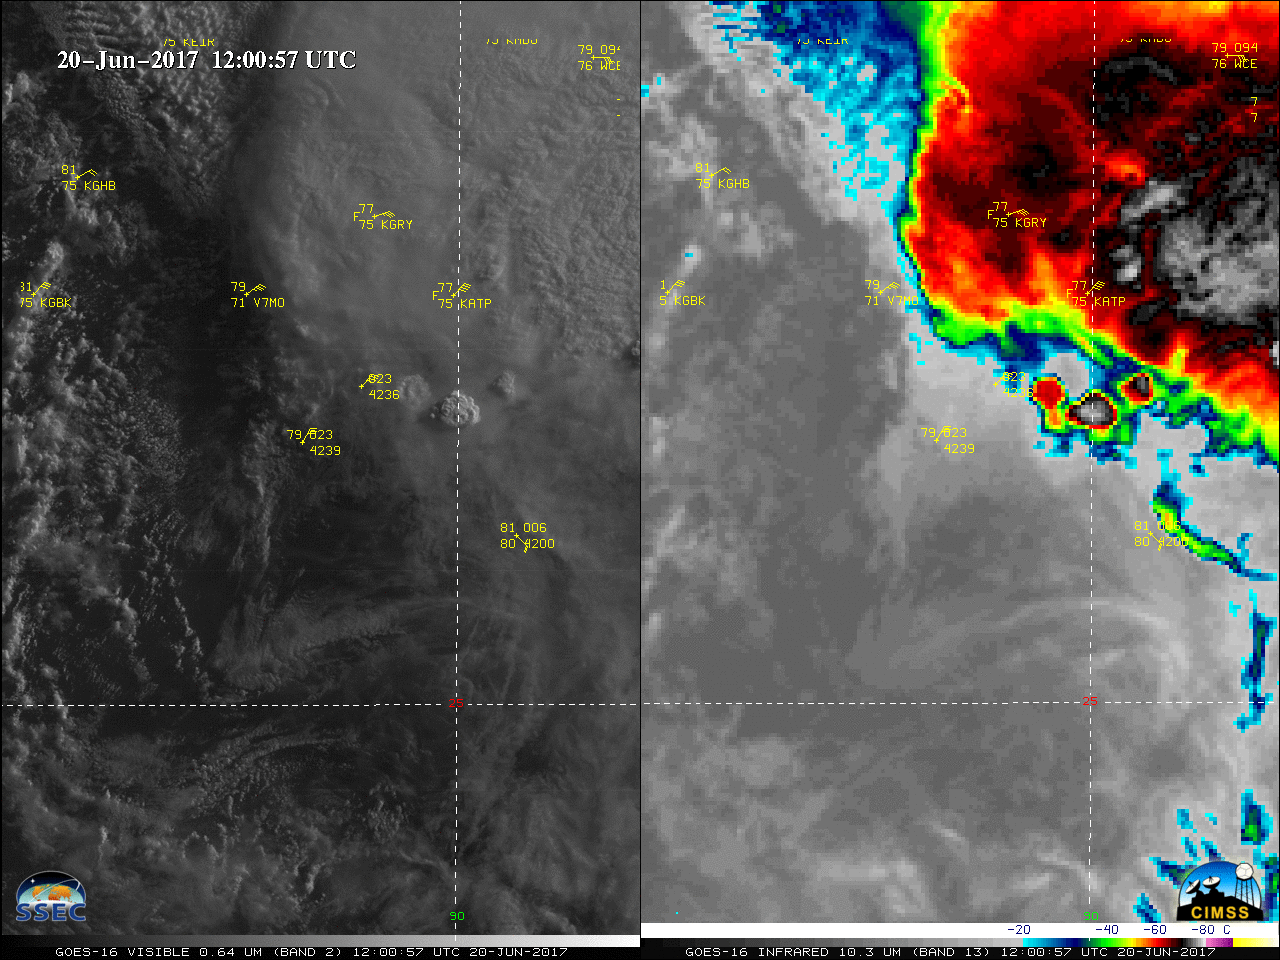 GOES-16 Visible (0.64 µm, left) and Infrared Window (10.3 µm, right) images, with hourly surface//ship/buoy reports plotted in yellow [click to play MP4 animation]